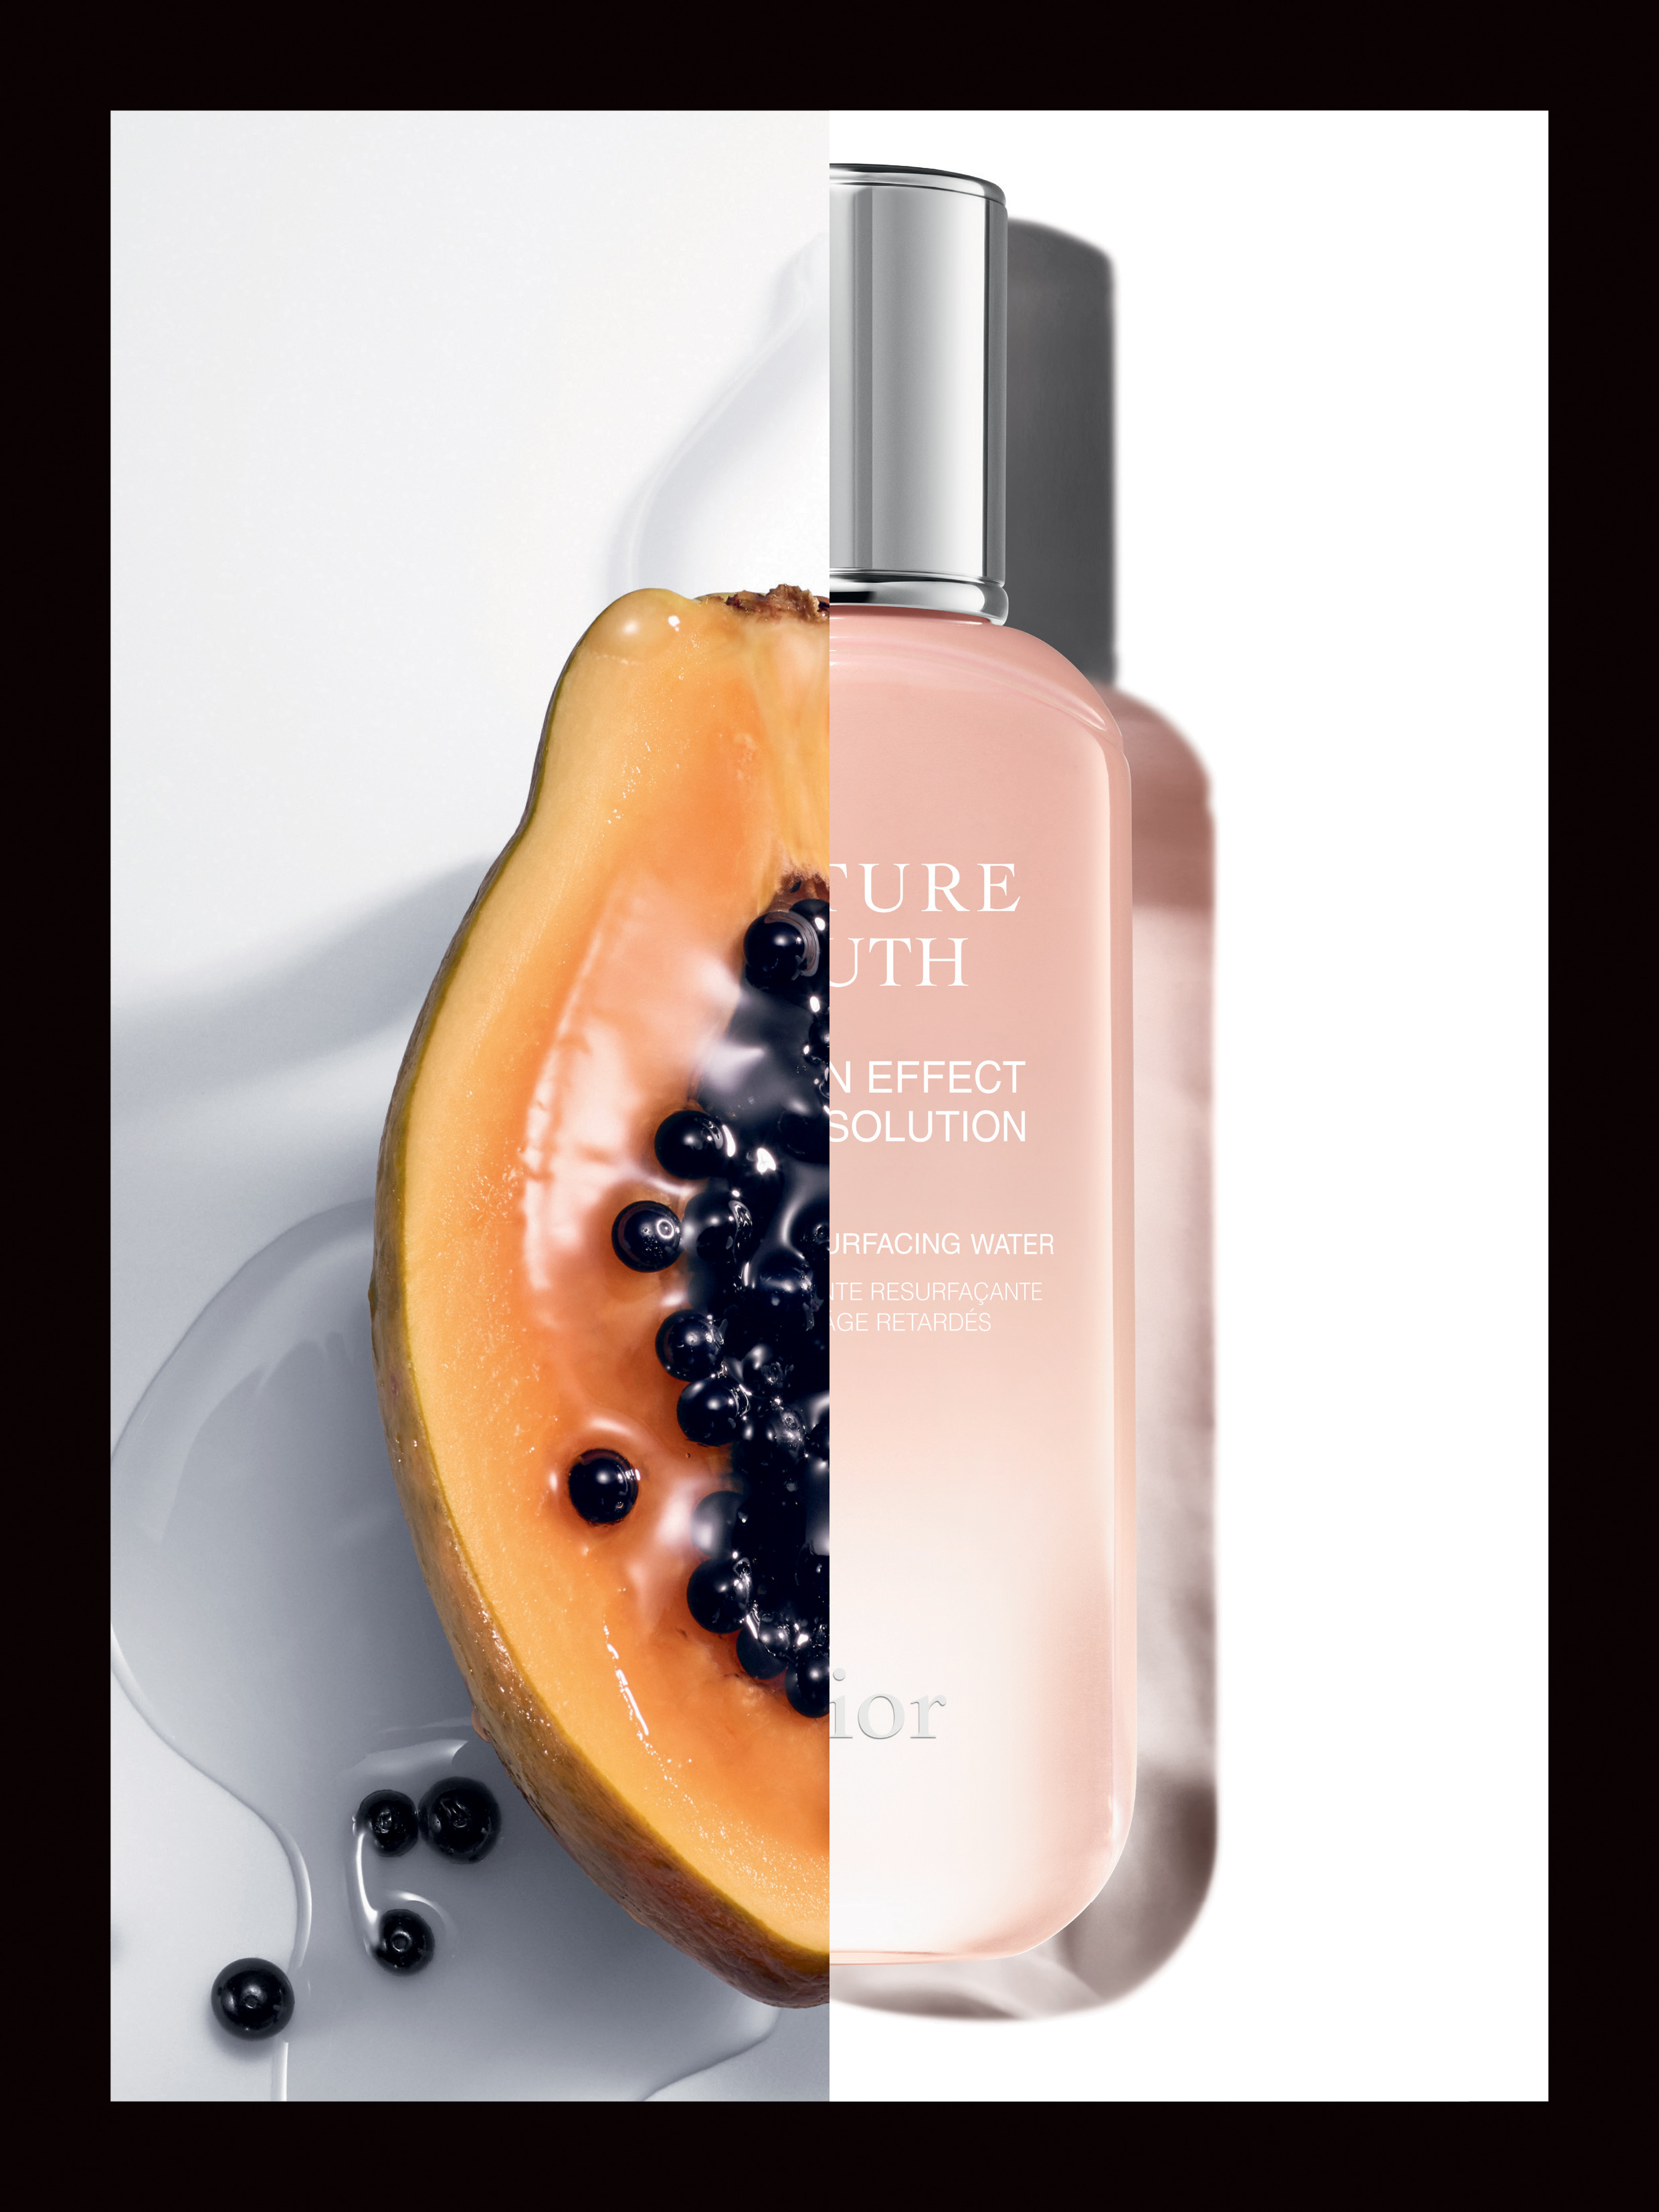 The Age-Delay Resurfacing Water contains rich papaya enzymes to buff away dead skin cells